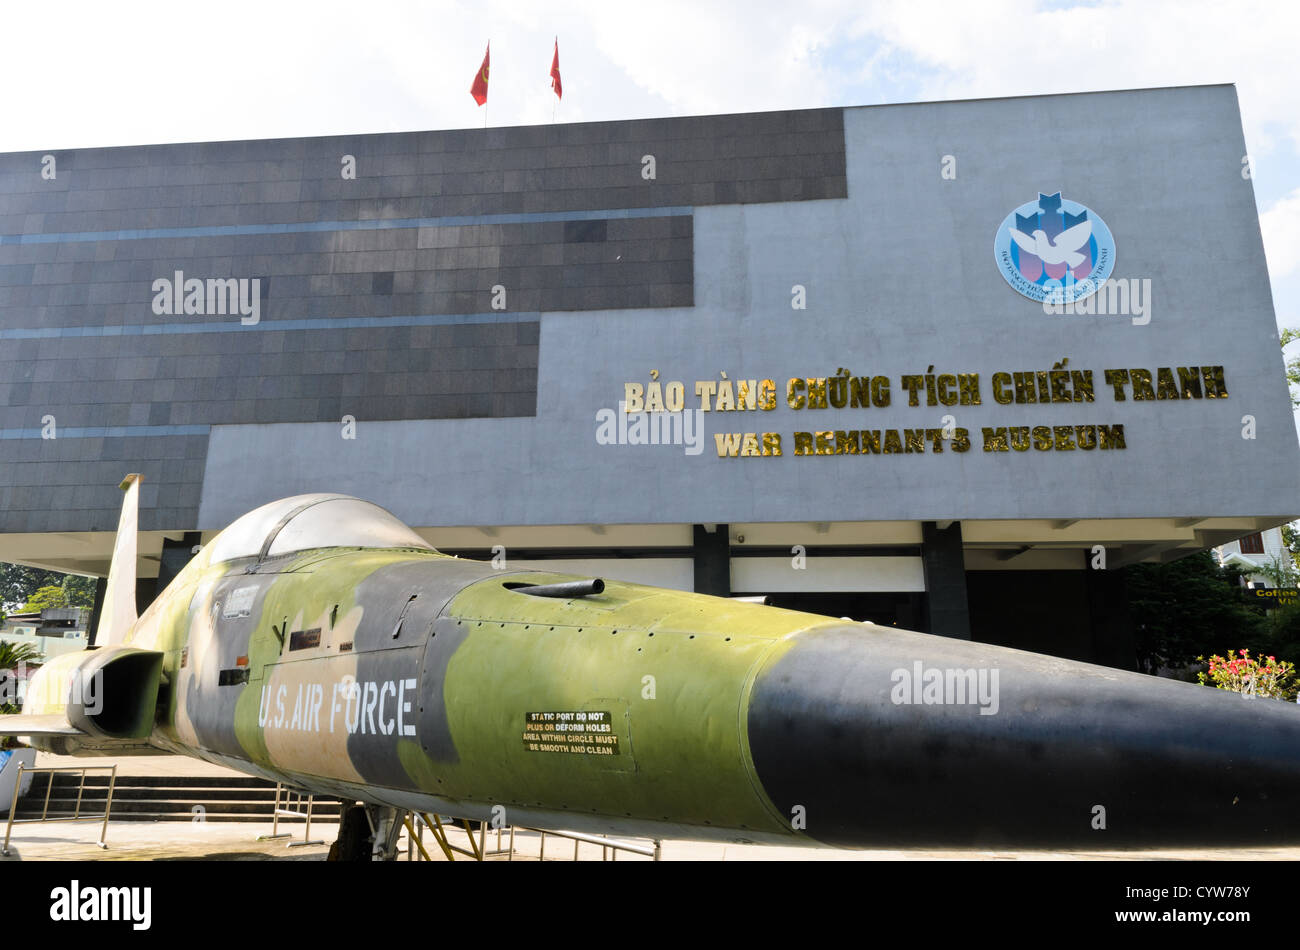 HO CHI MINH CITY, Vietnam - An American F-111 bomber on display in the main coutyard outside the War Remnants Museum in Ho Chi Minh City (Saigon), Vietnam. Stock Photo